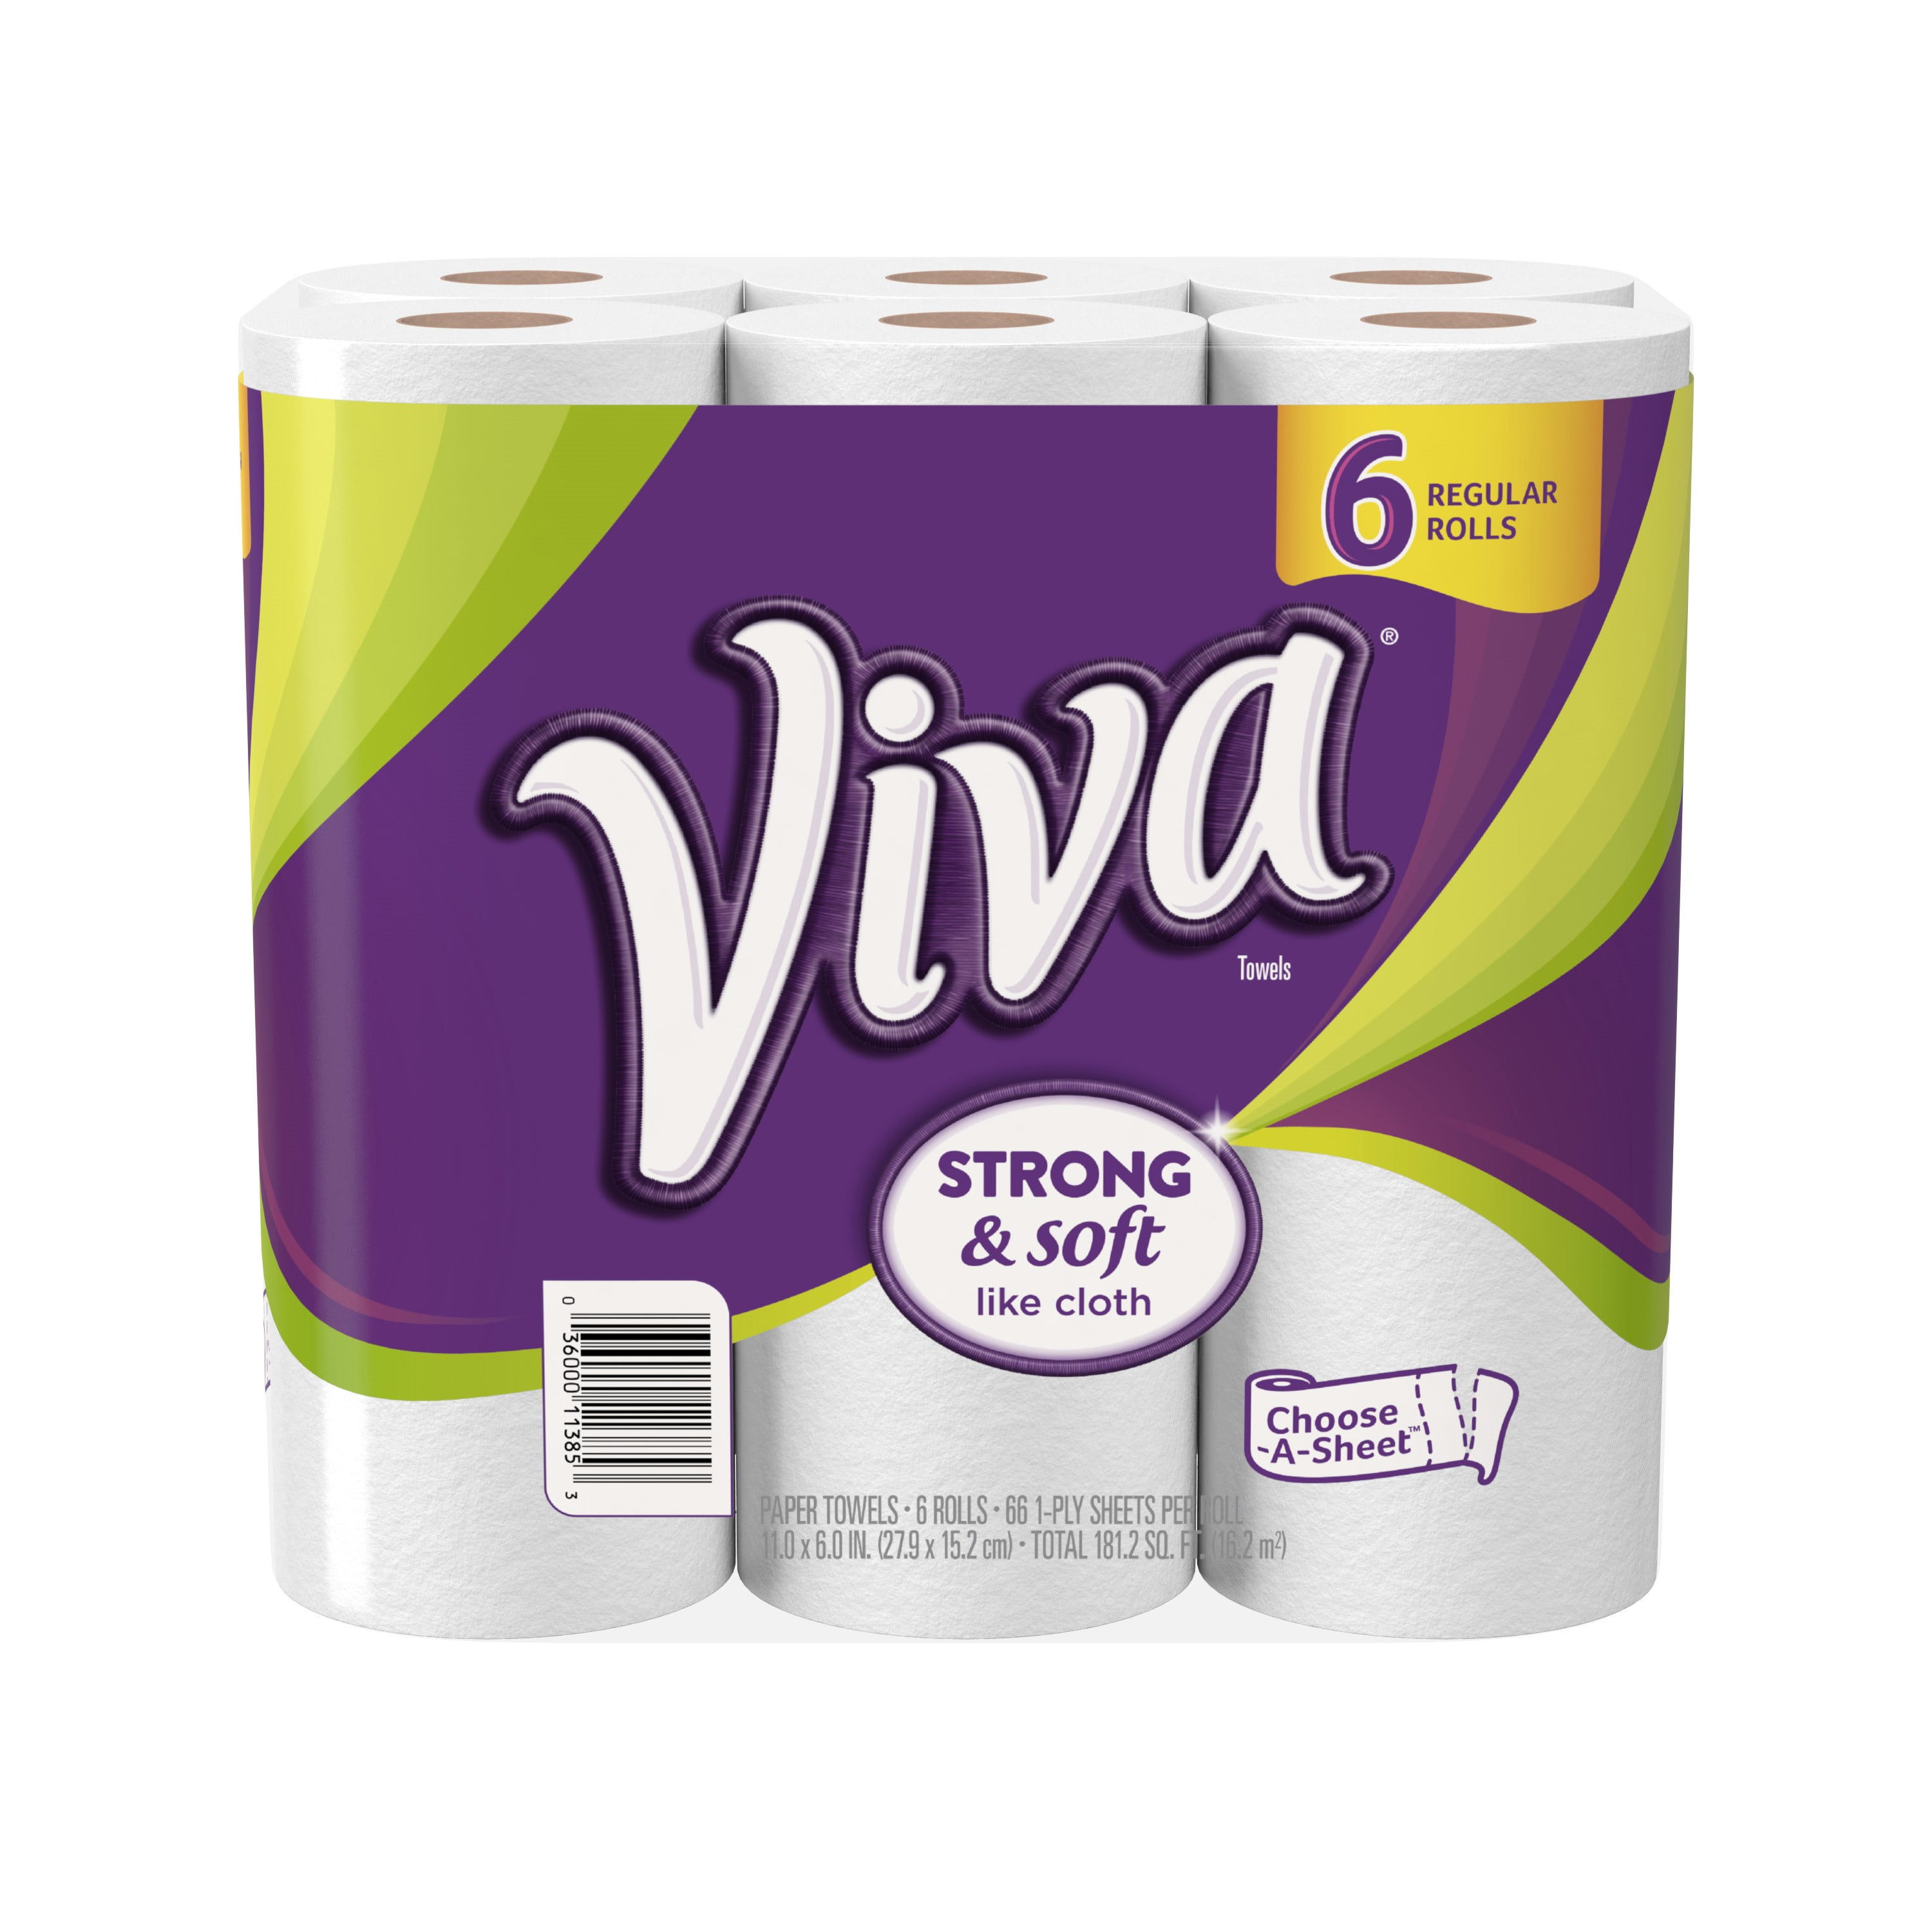 VIVA Choose-A-Sheet* Paper Towels 6 Rolls Double Roll White 